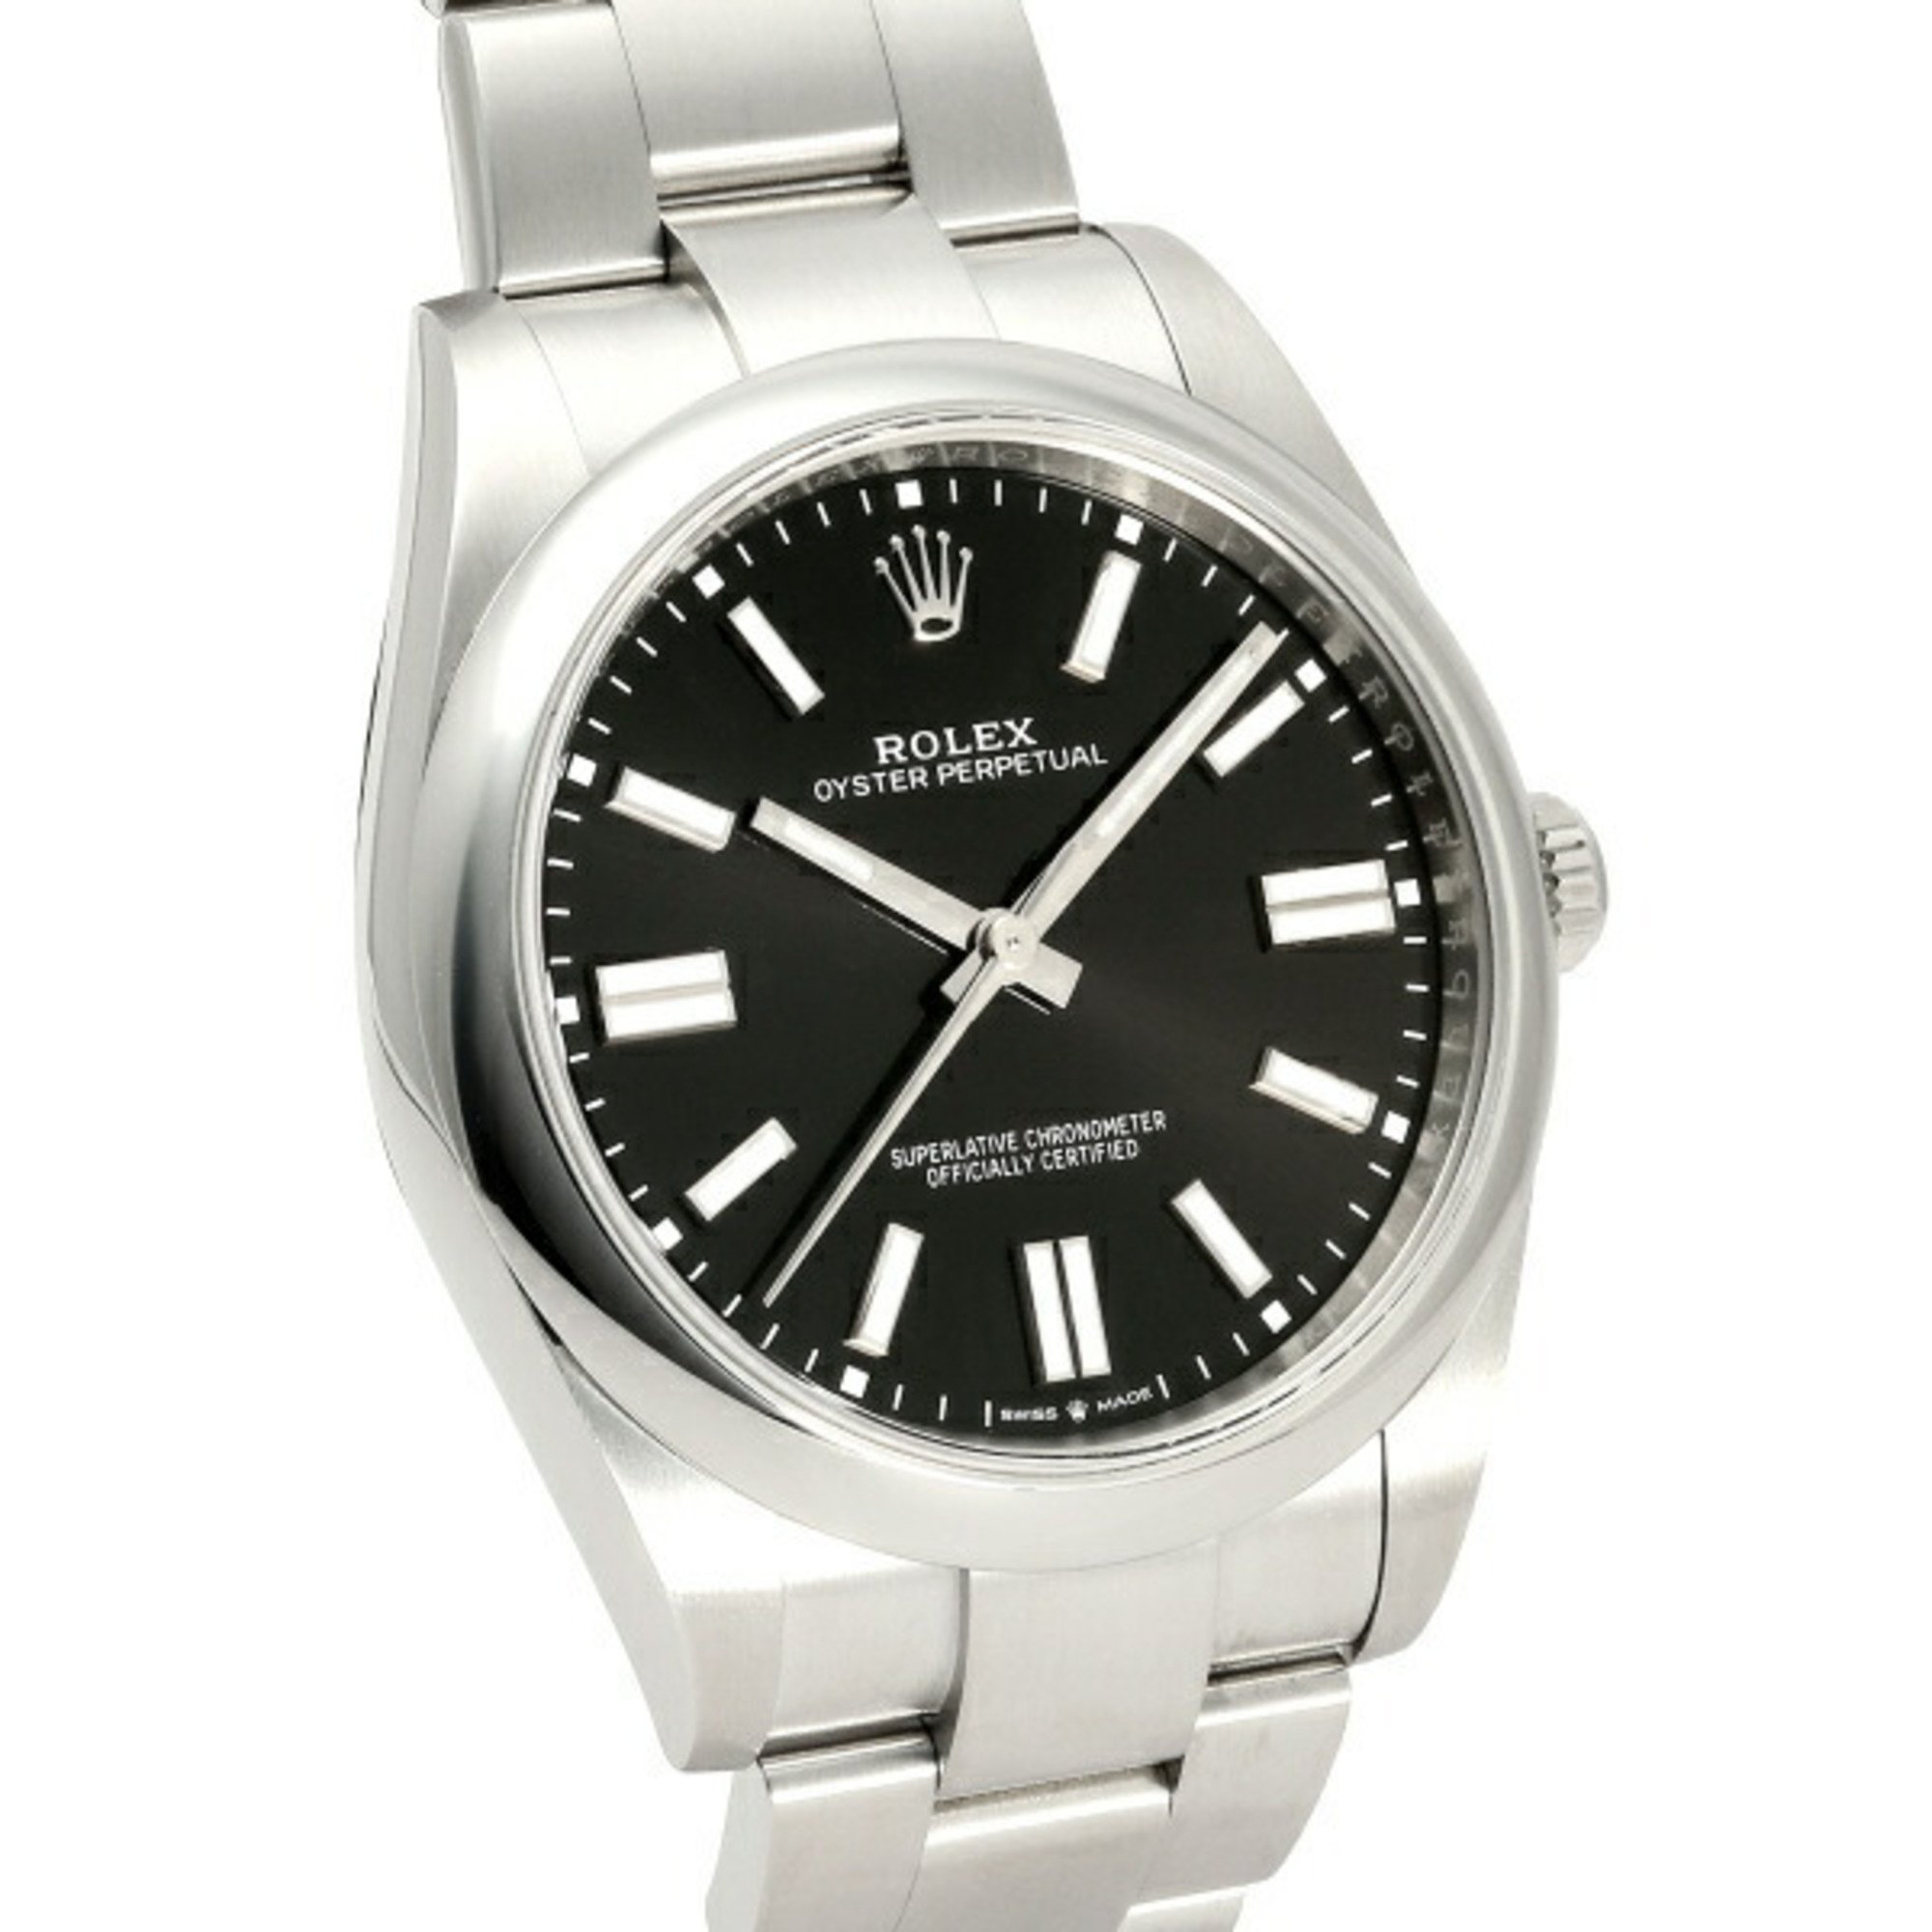 Rolex Oyster Perpetual 124300 Bright Black Dial Watch Men's